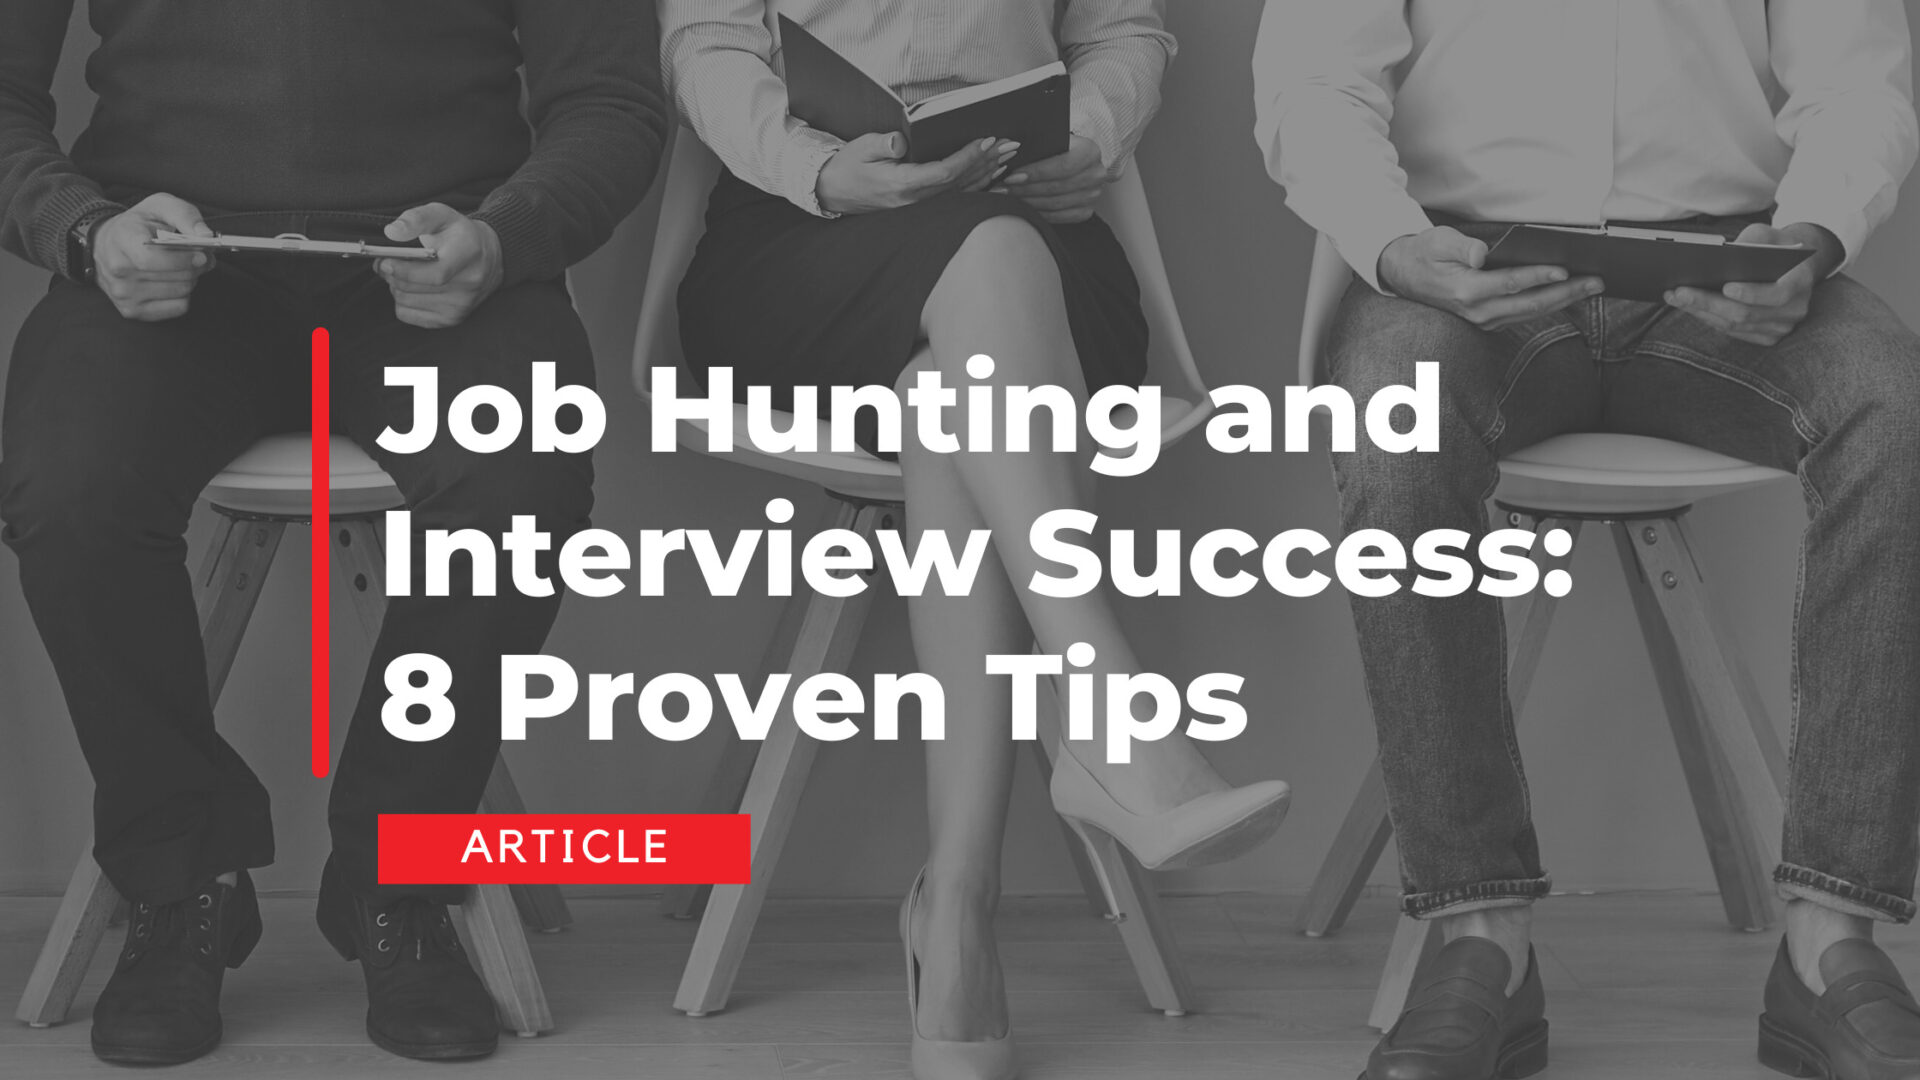 Job Hunting and Interview Success: 8 Proven Tips